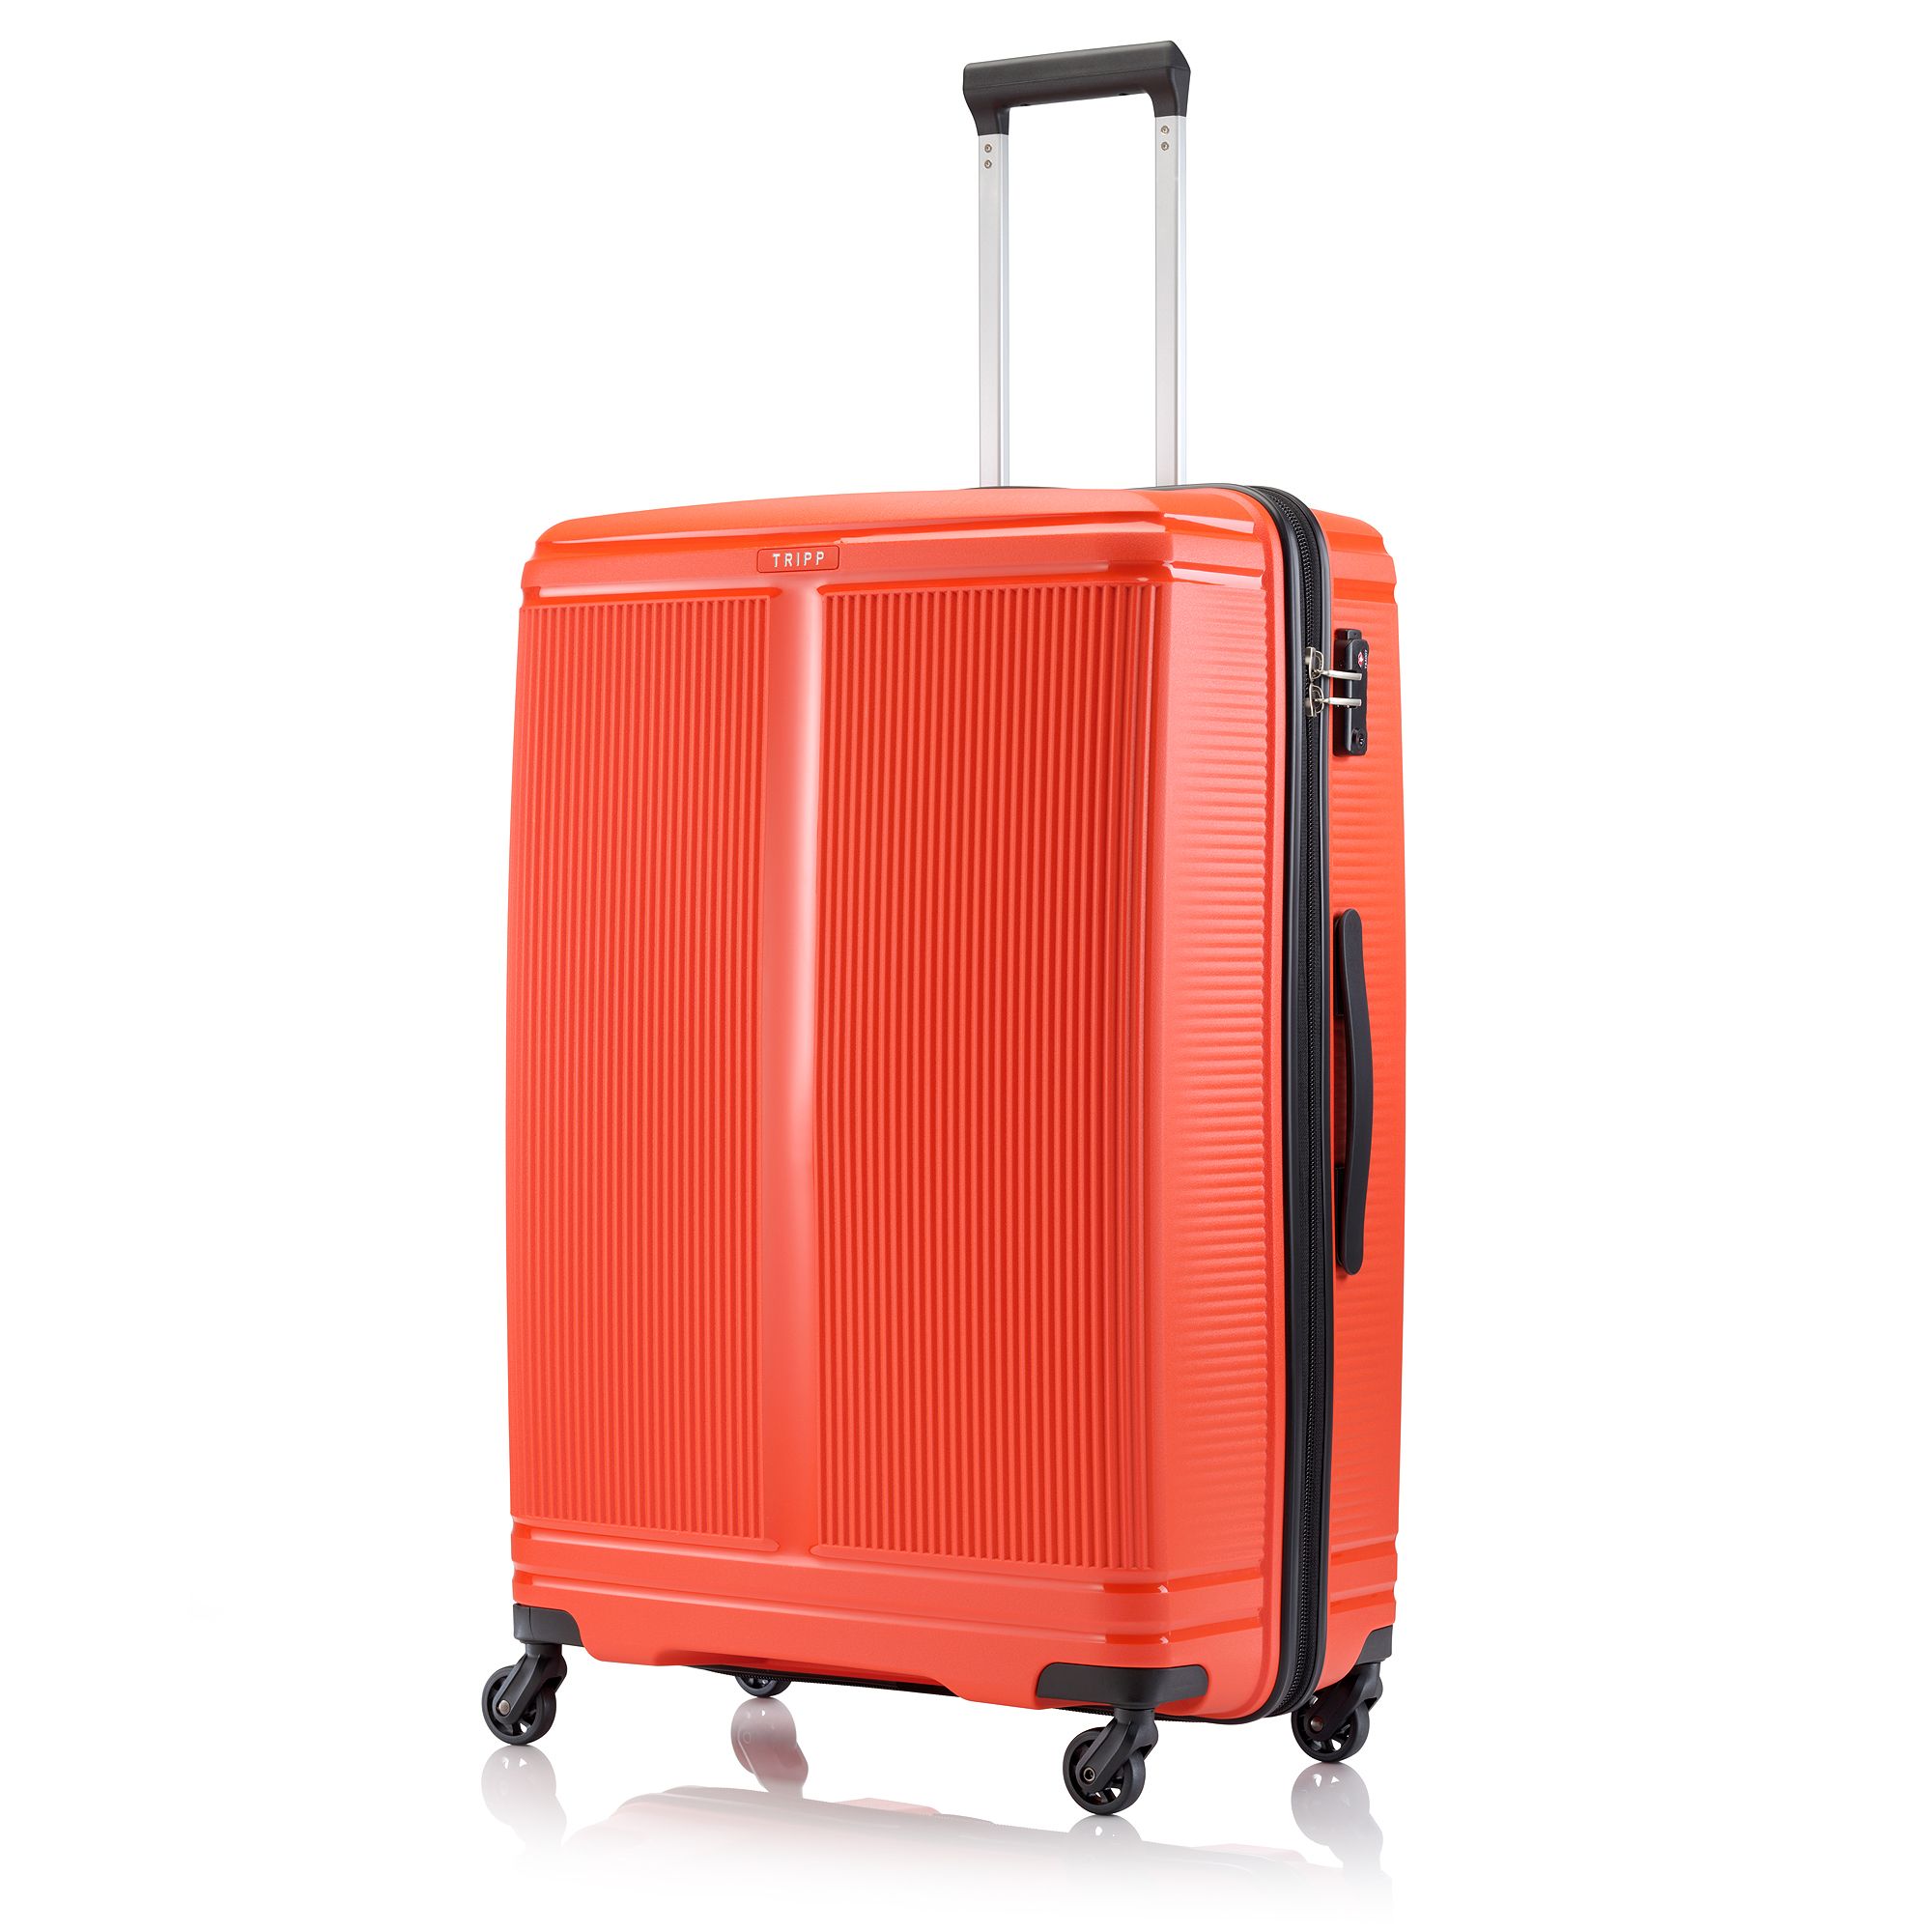 But this similar Continental suitcase is just £65 at Tripp.co.uk